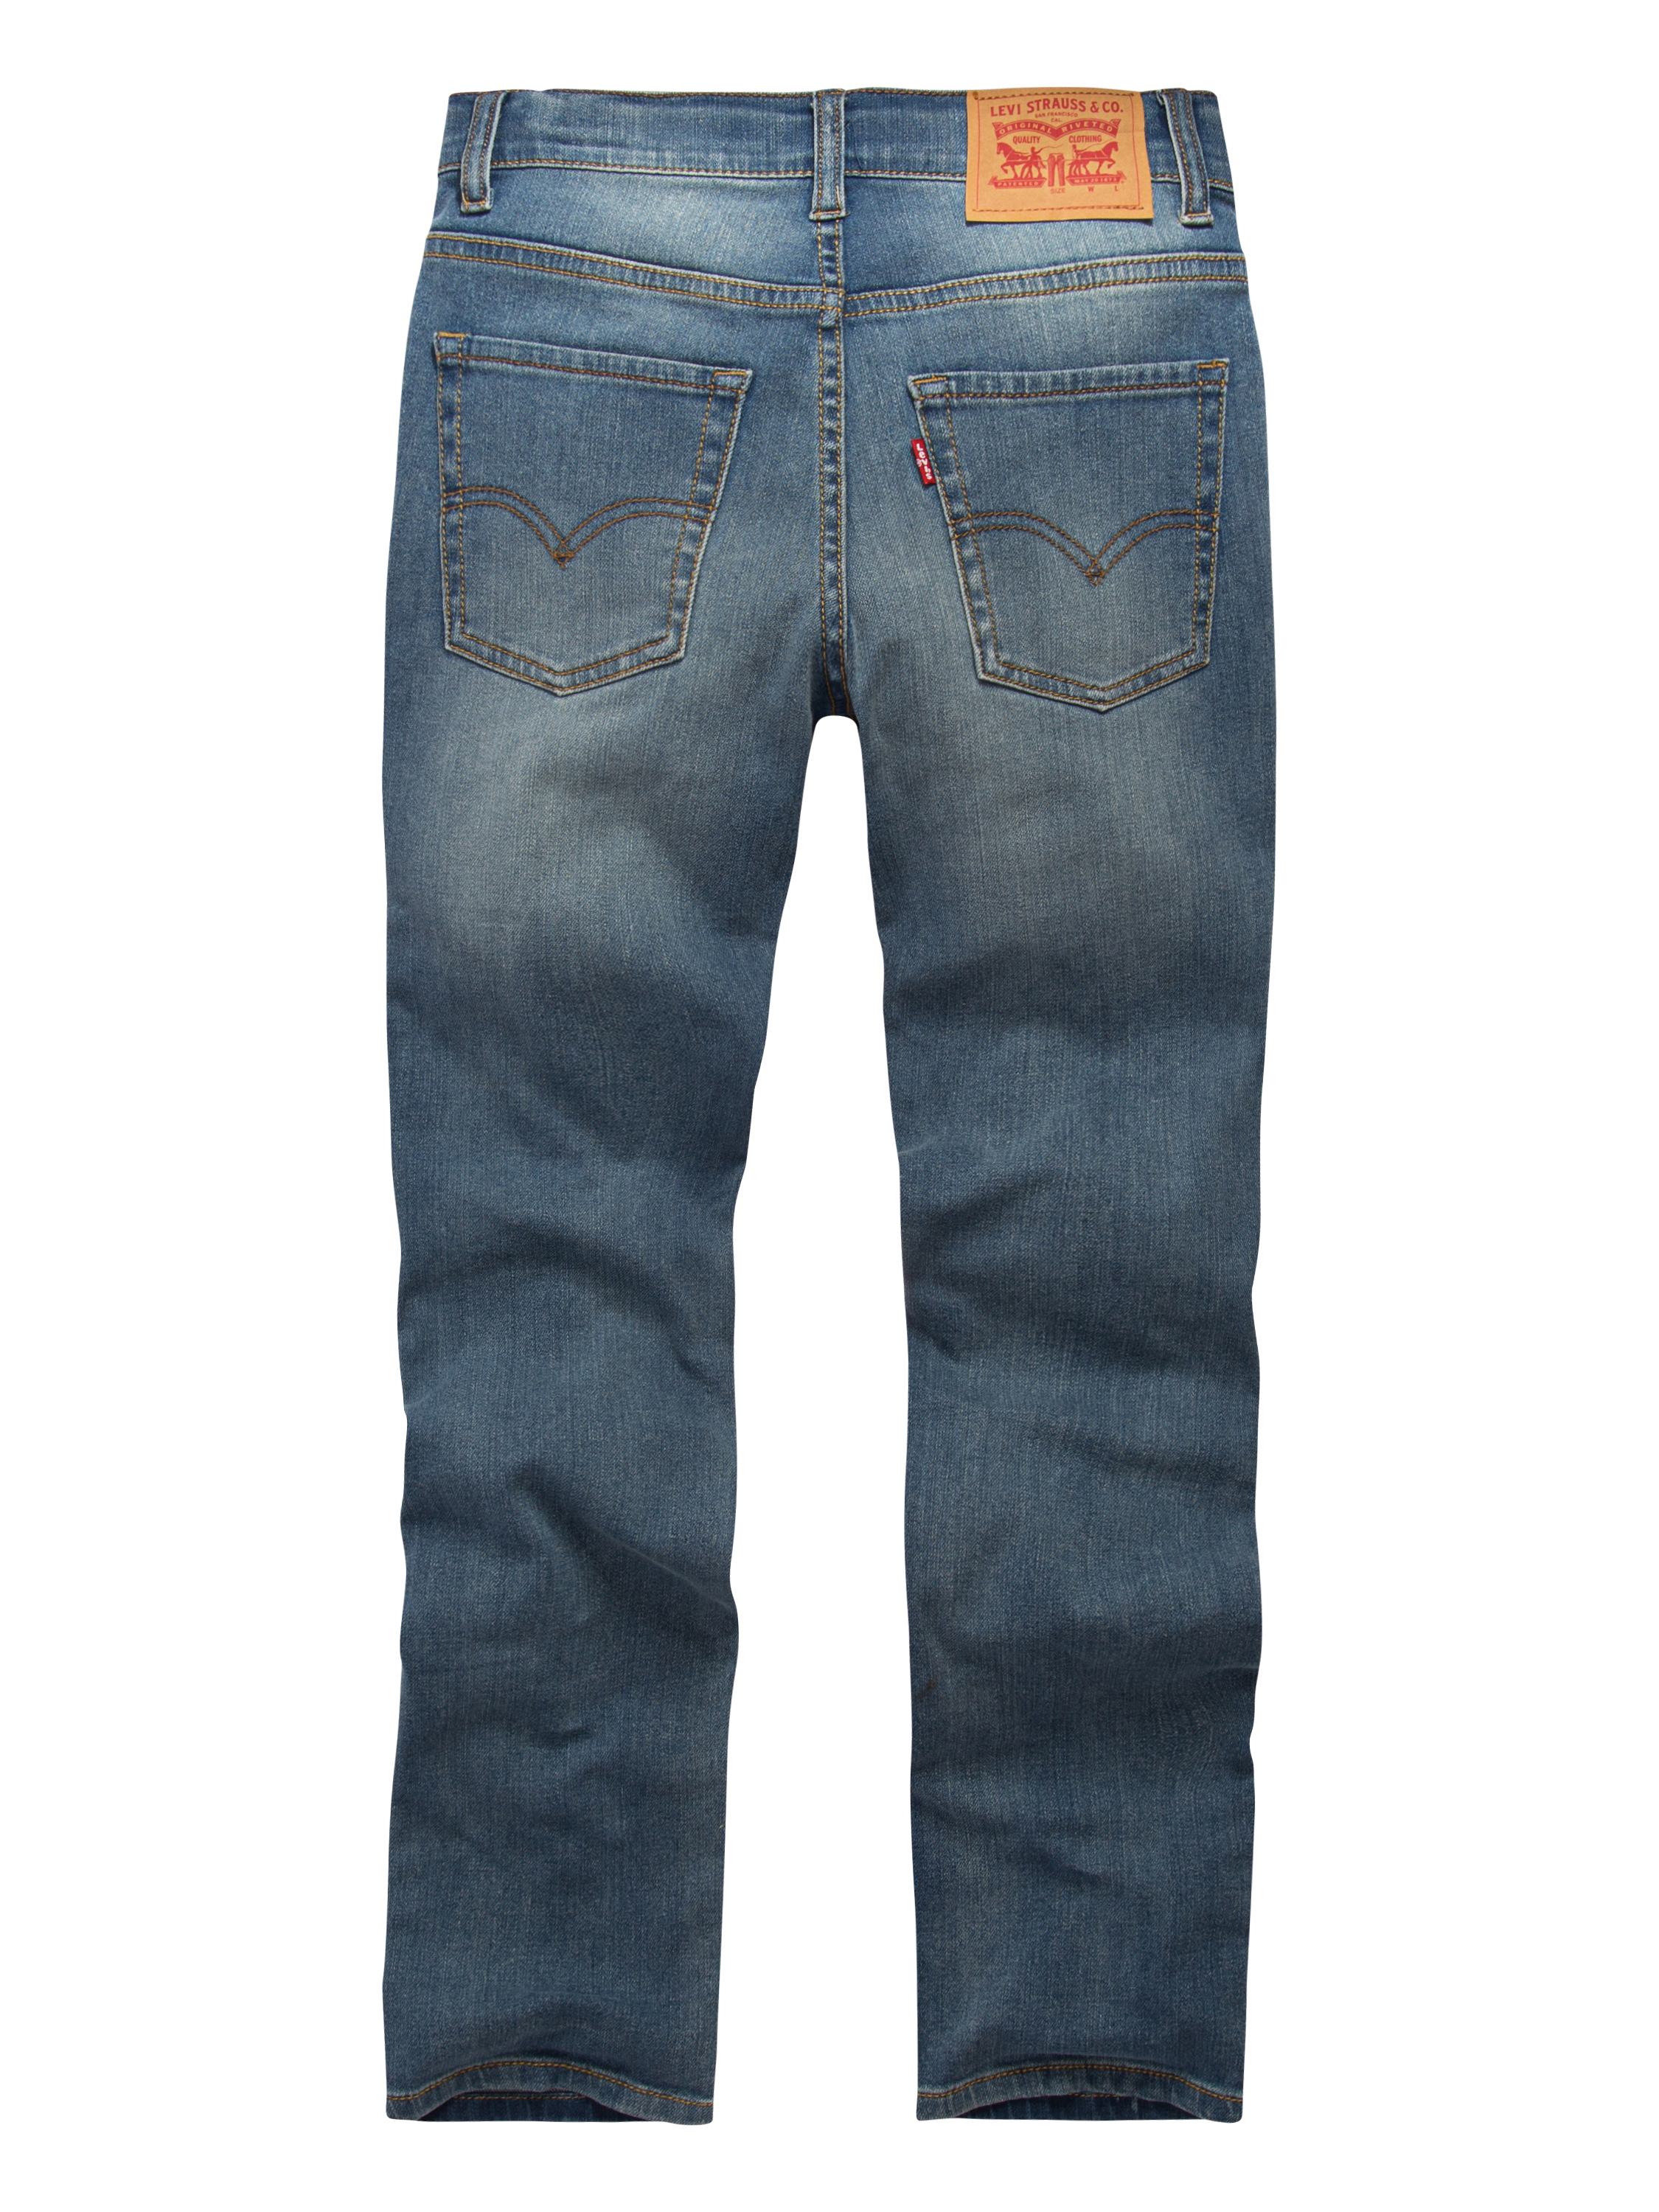 Levi's Boys' 510 Skinny Fit Jeans, Sizes 4-20 - image 3 of 3